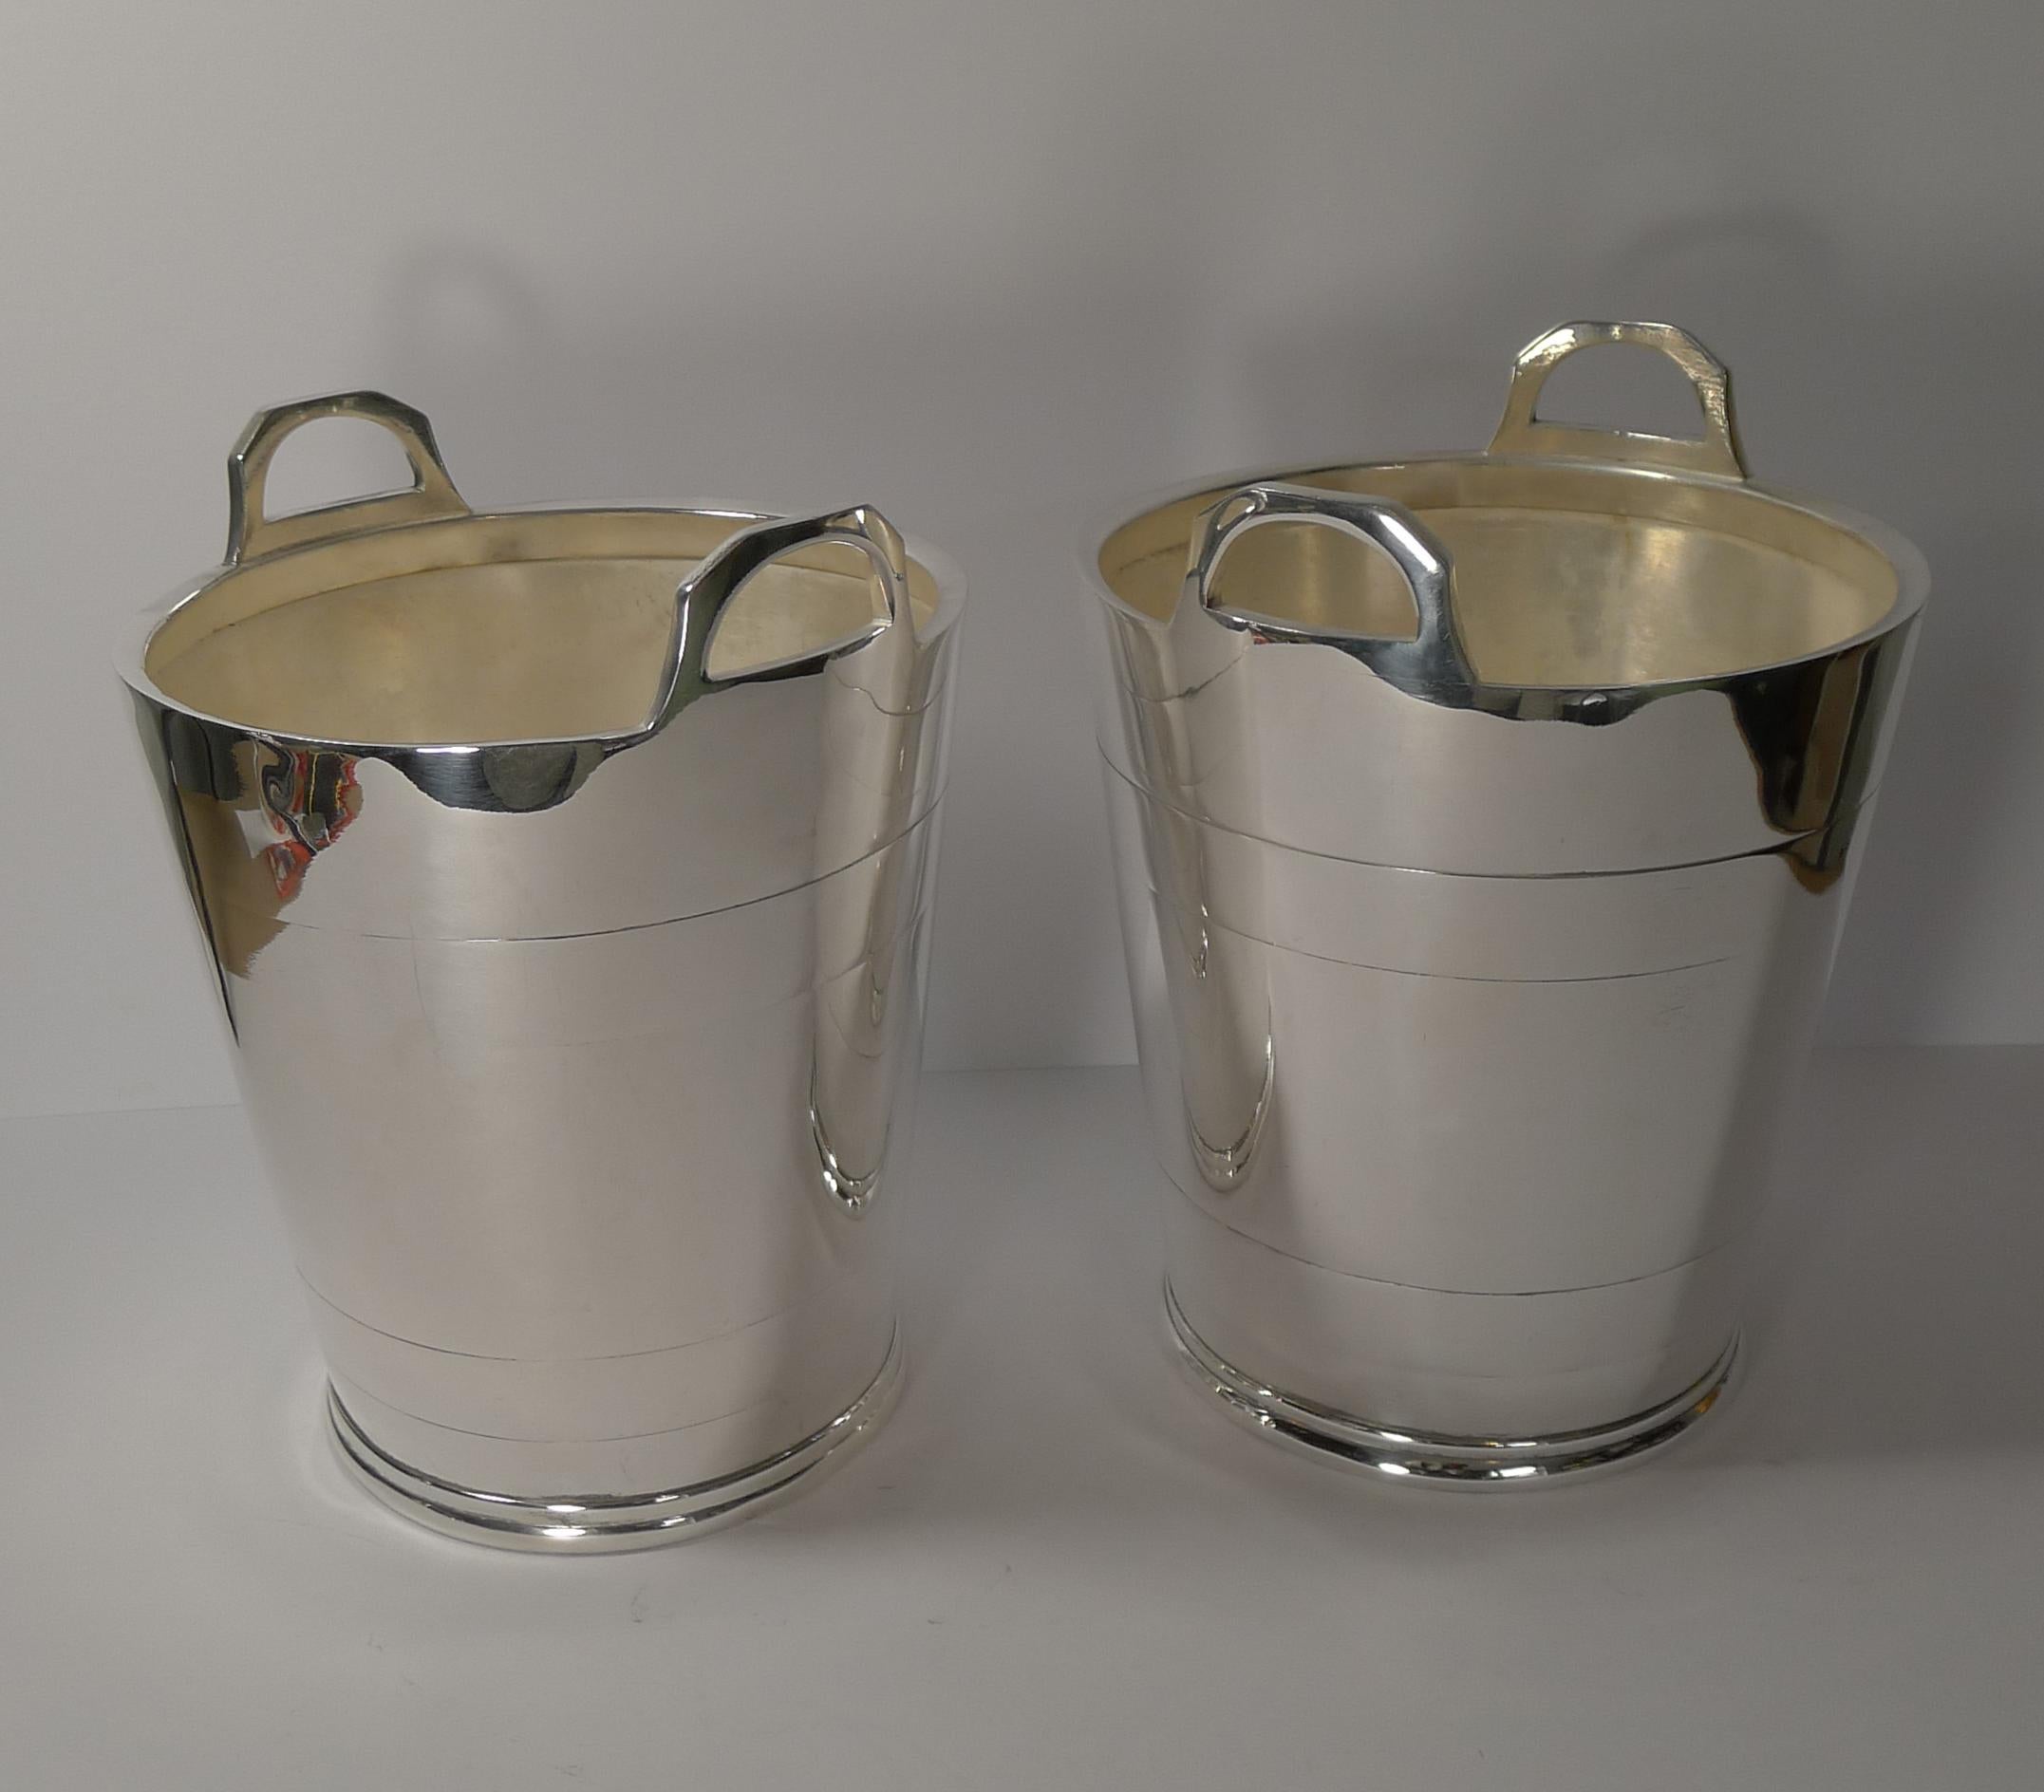 A truly fine pair of vintage English silver plated wine coolers or buckets both in the form of a coopered wooden pail or bucket with handles to each side.
Just back from our silversmith, professionally polished to shine with all scratches etc.